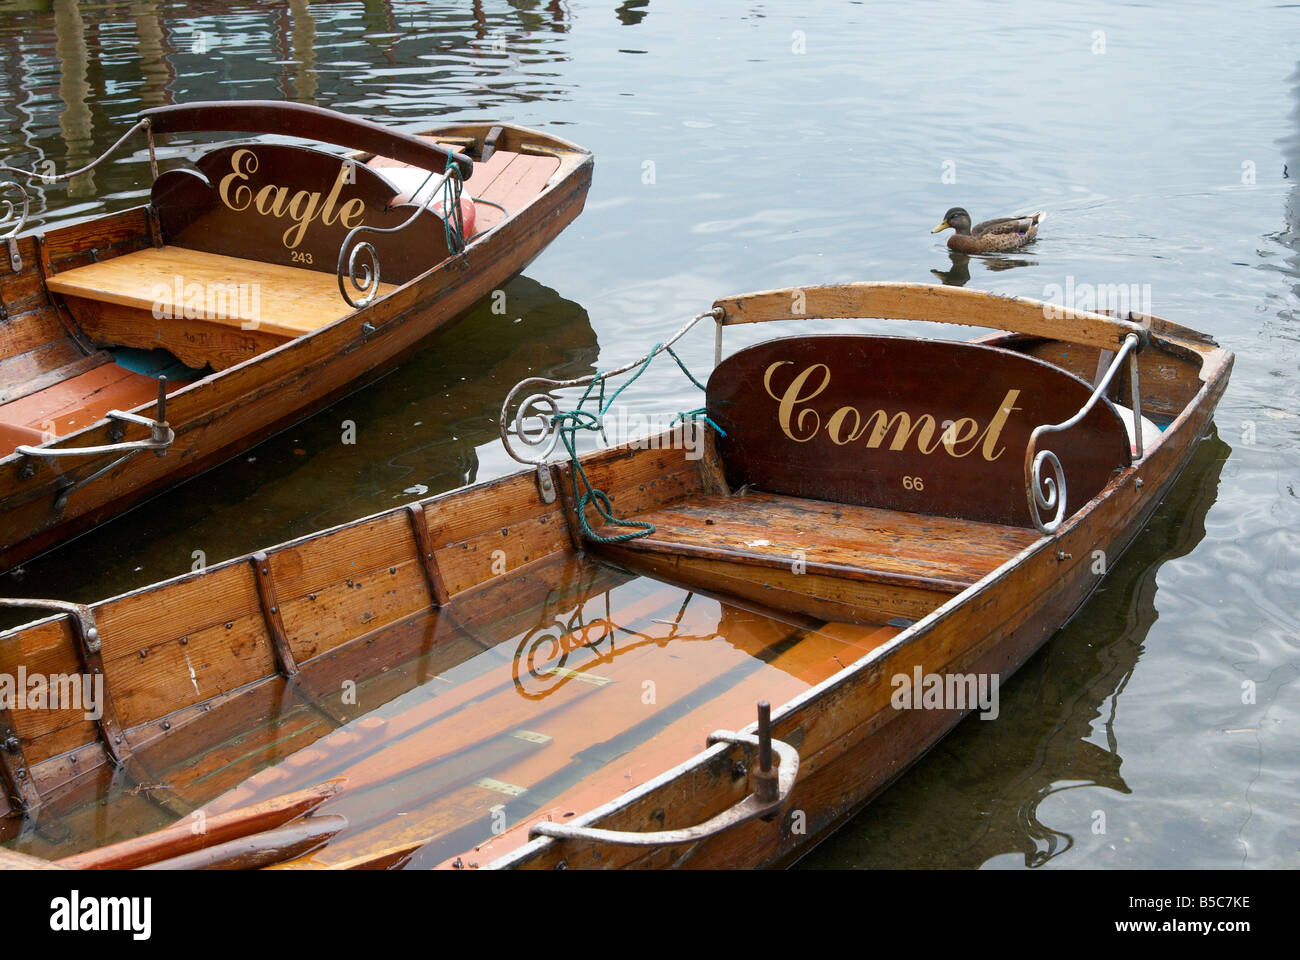 Traditional lakeland skiffs filled with rainwater, Ambleside, Lake Windermere in the English Lake District, Cumbria Stock Photo